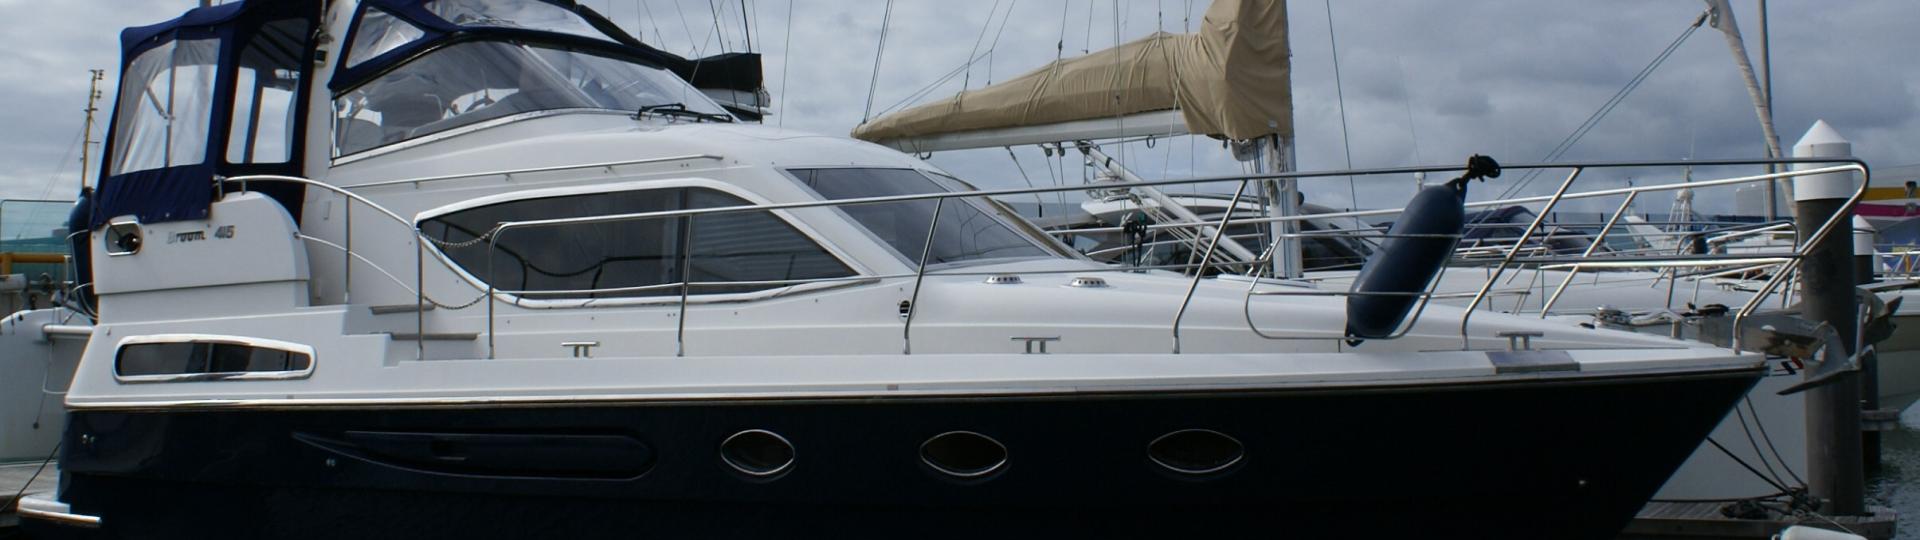 Broom 415 for sale